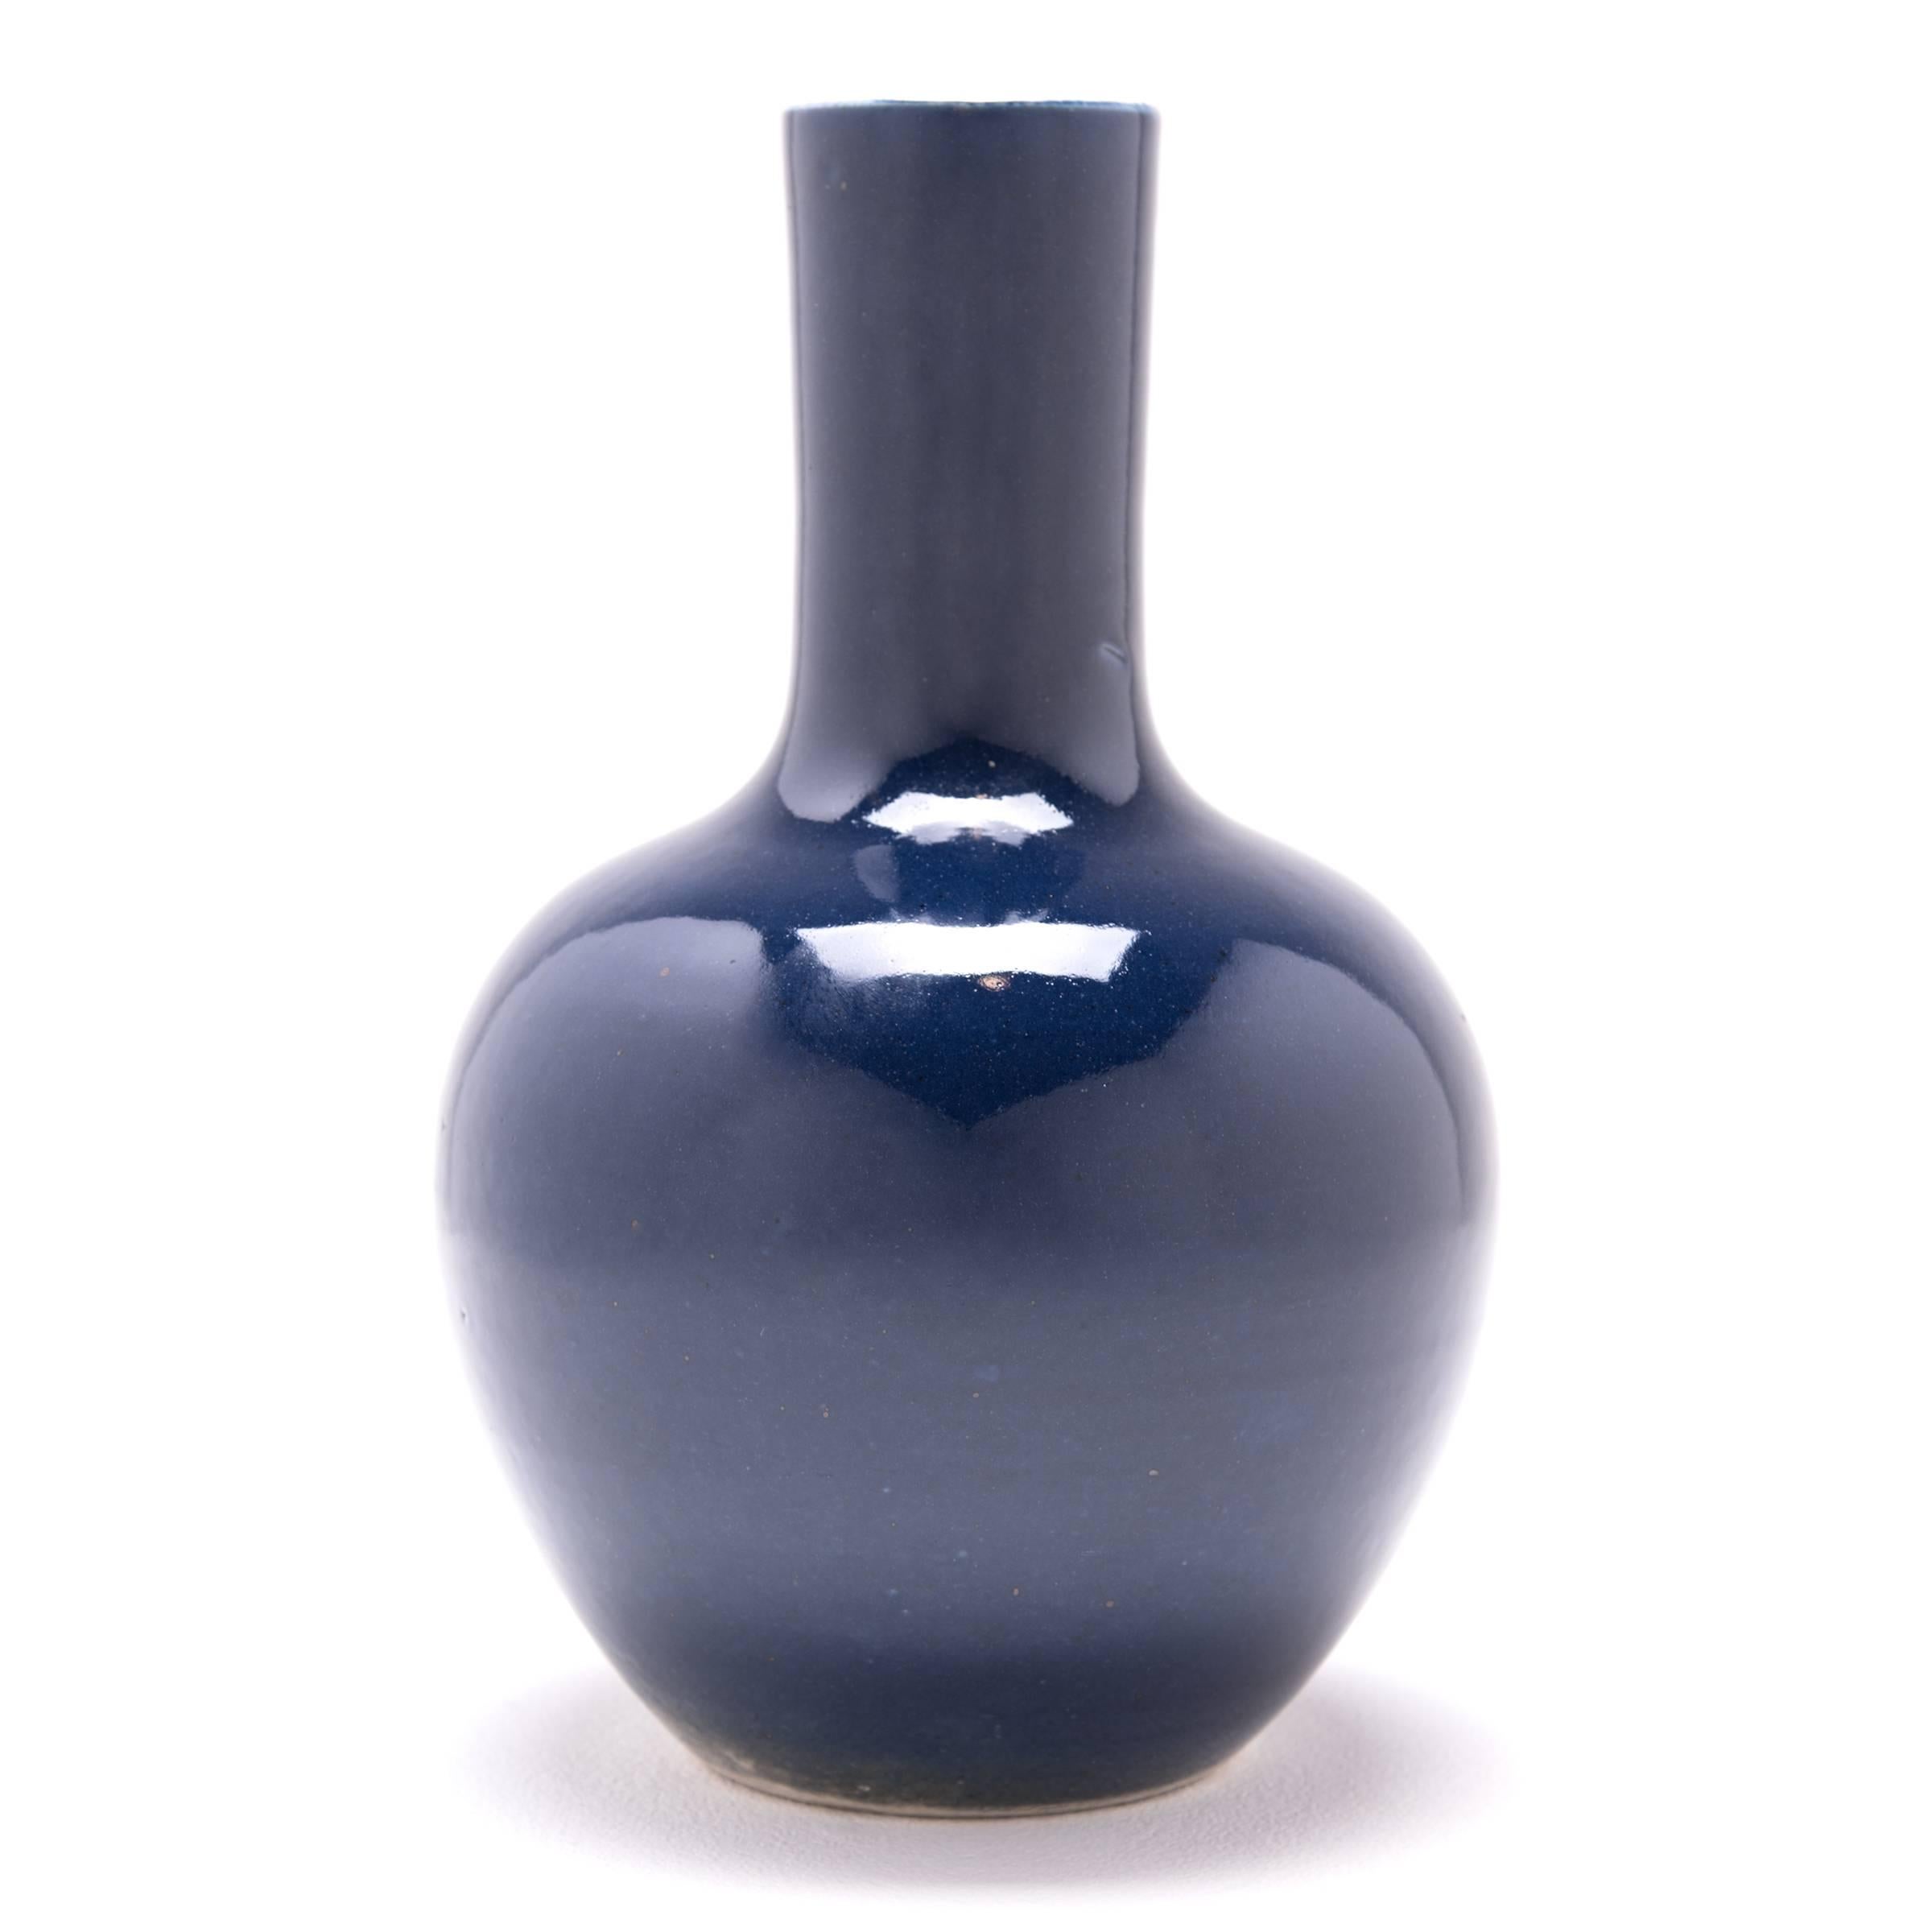 This modern gooseneck vase was made by a skilled artisan, knowledgeable in the ancient techniques of glazing which made Chinese ceramics world renown. This distinctive color is known as indigo. Across Asia and Europe the color blue gained important